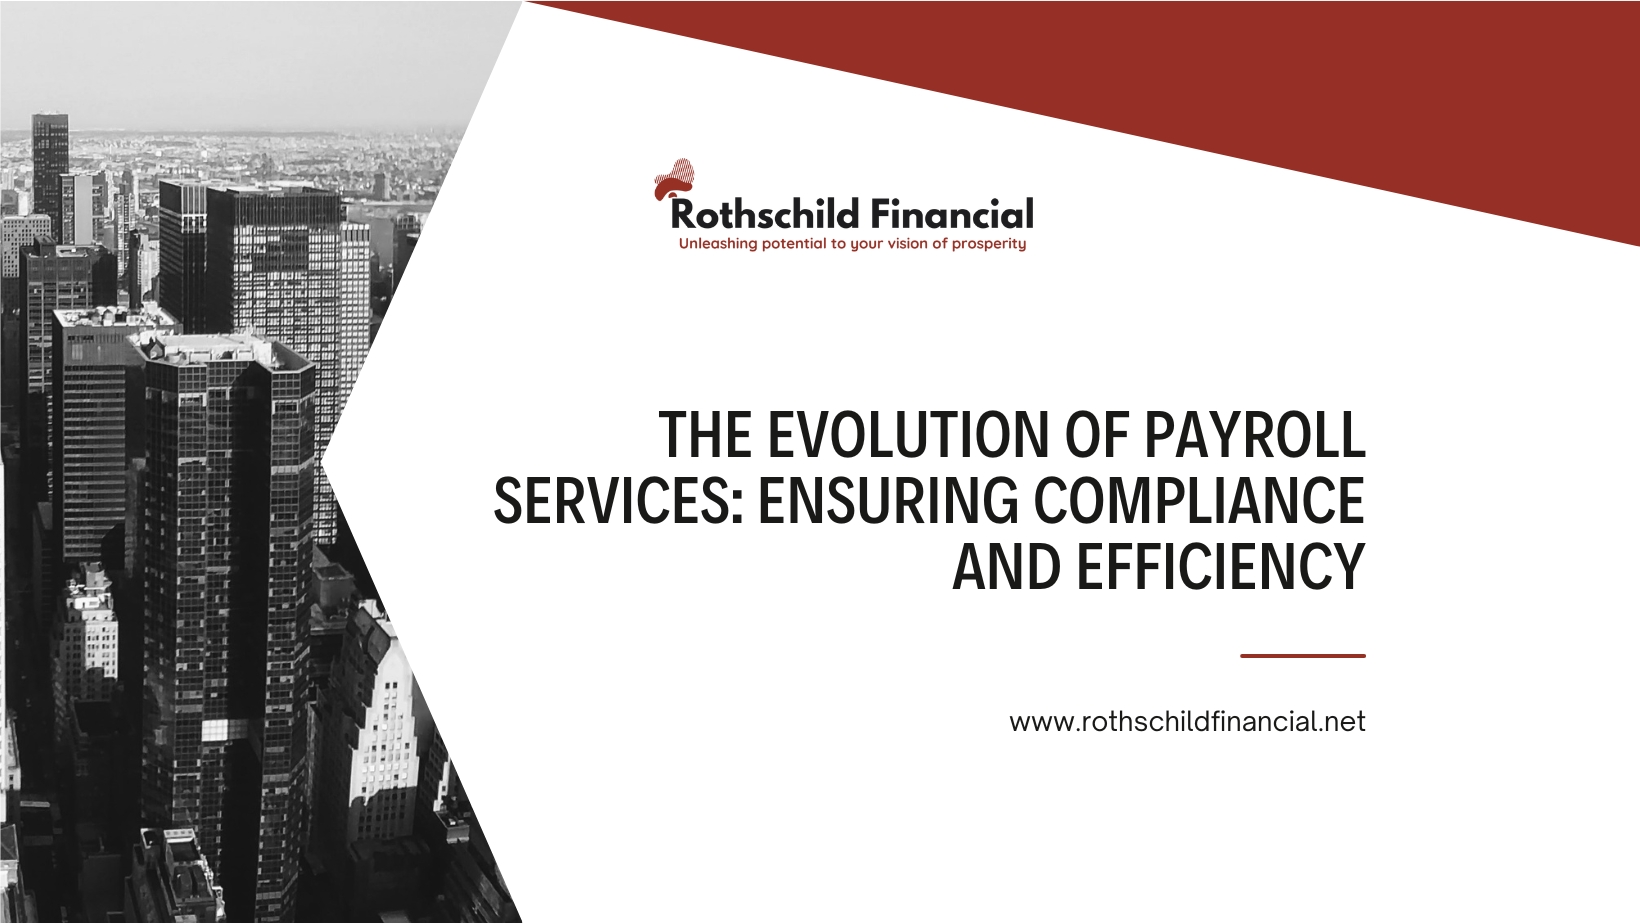 The Evolution of Payroll Services- Ensuring Compliance and Efficiency